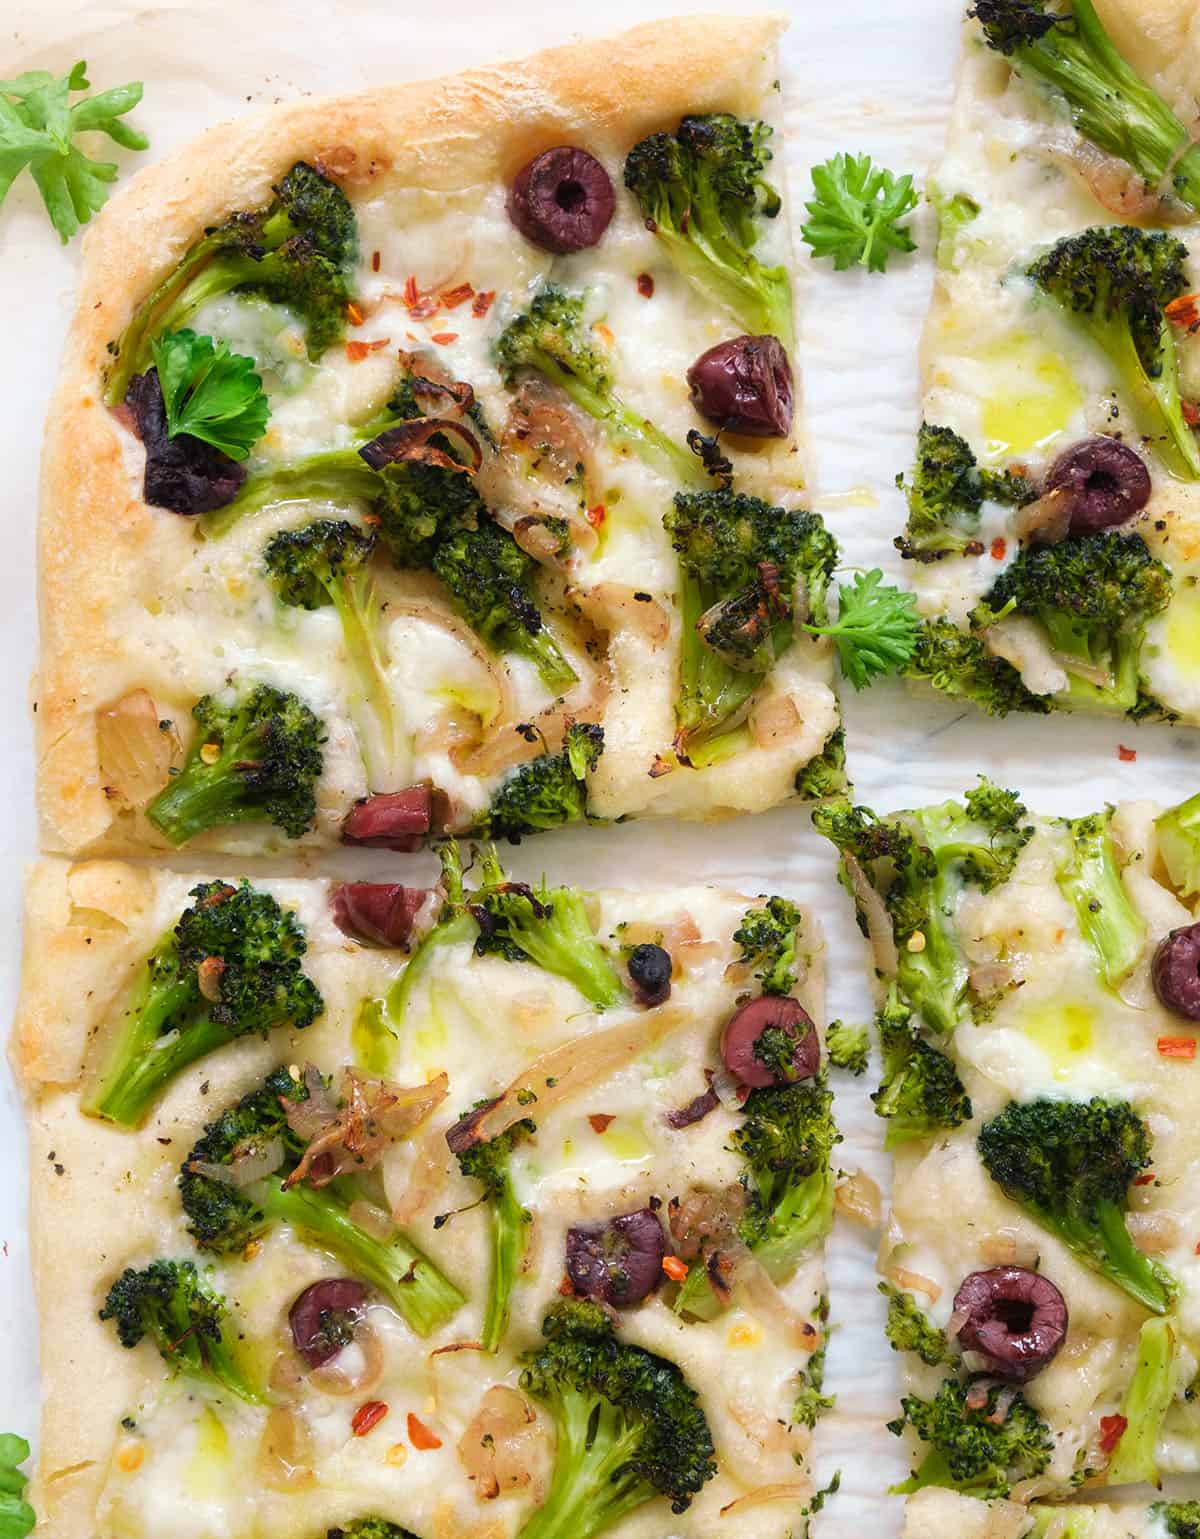 Top view of a large broccoli pizza with black olives cut into slices.